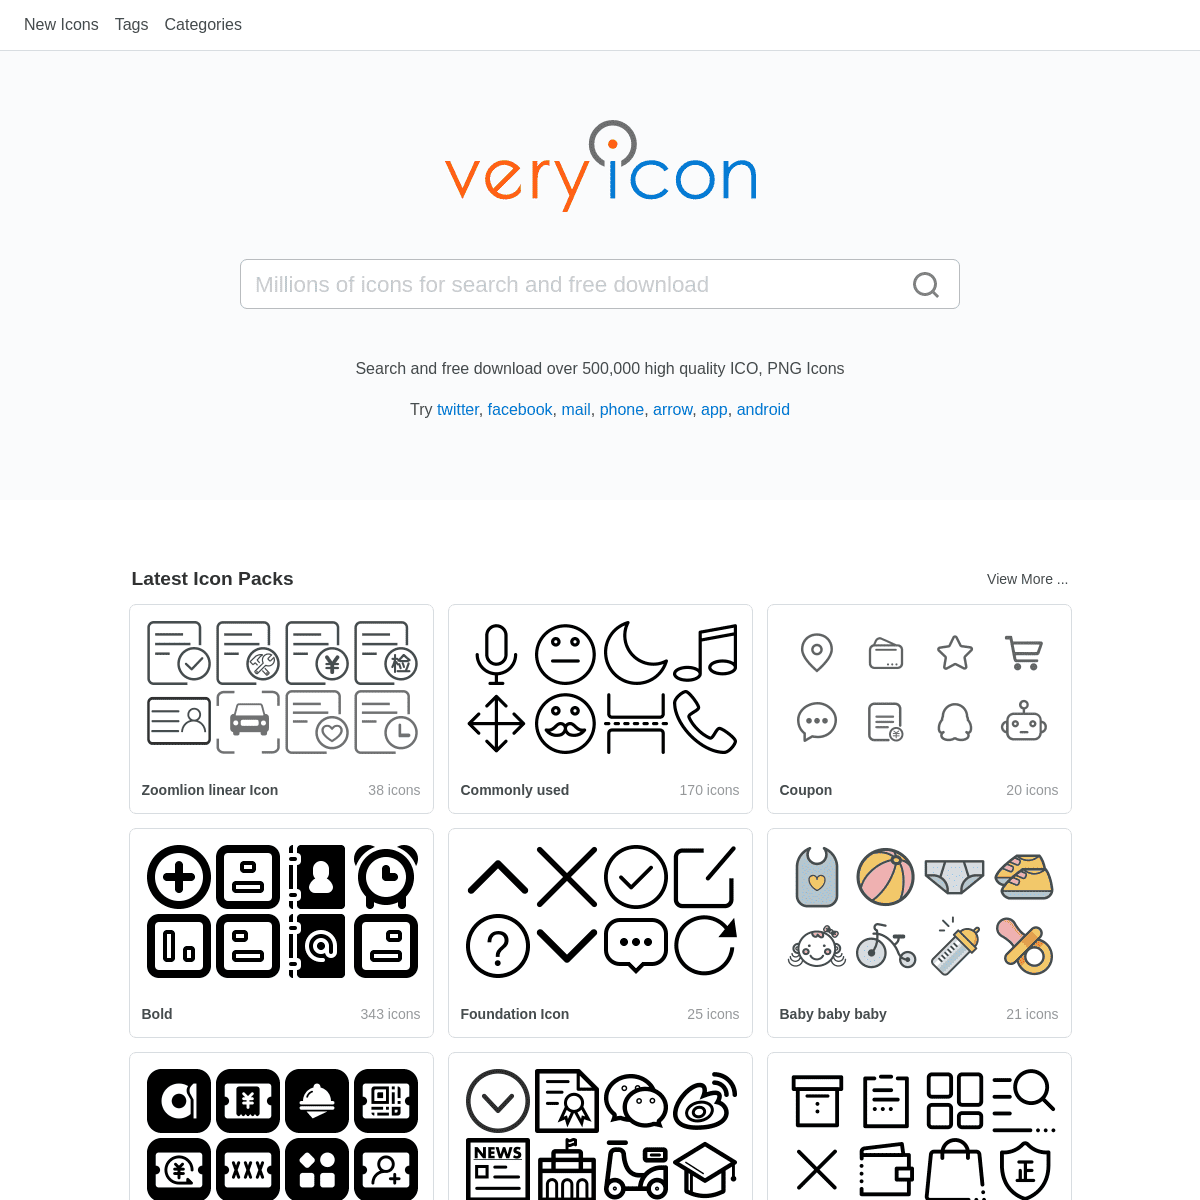 A complete backup of https://veryicon.com